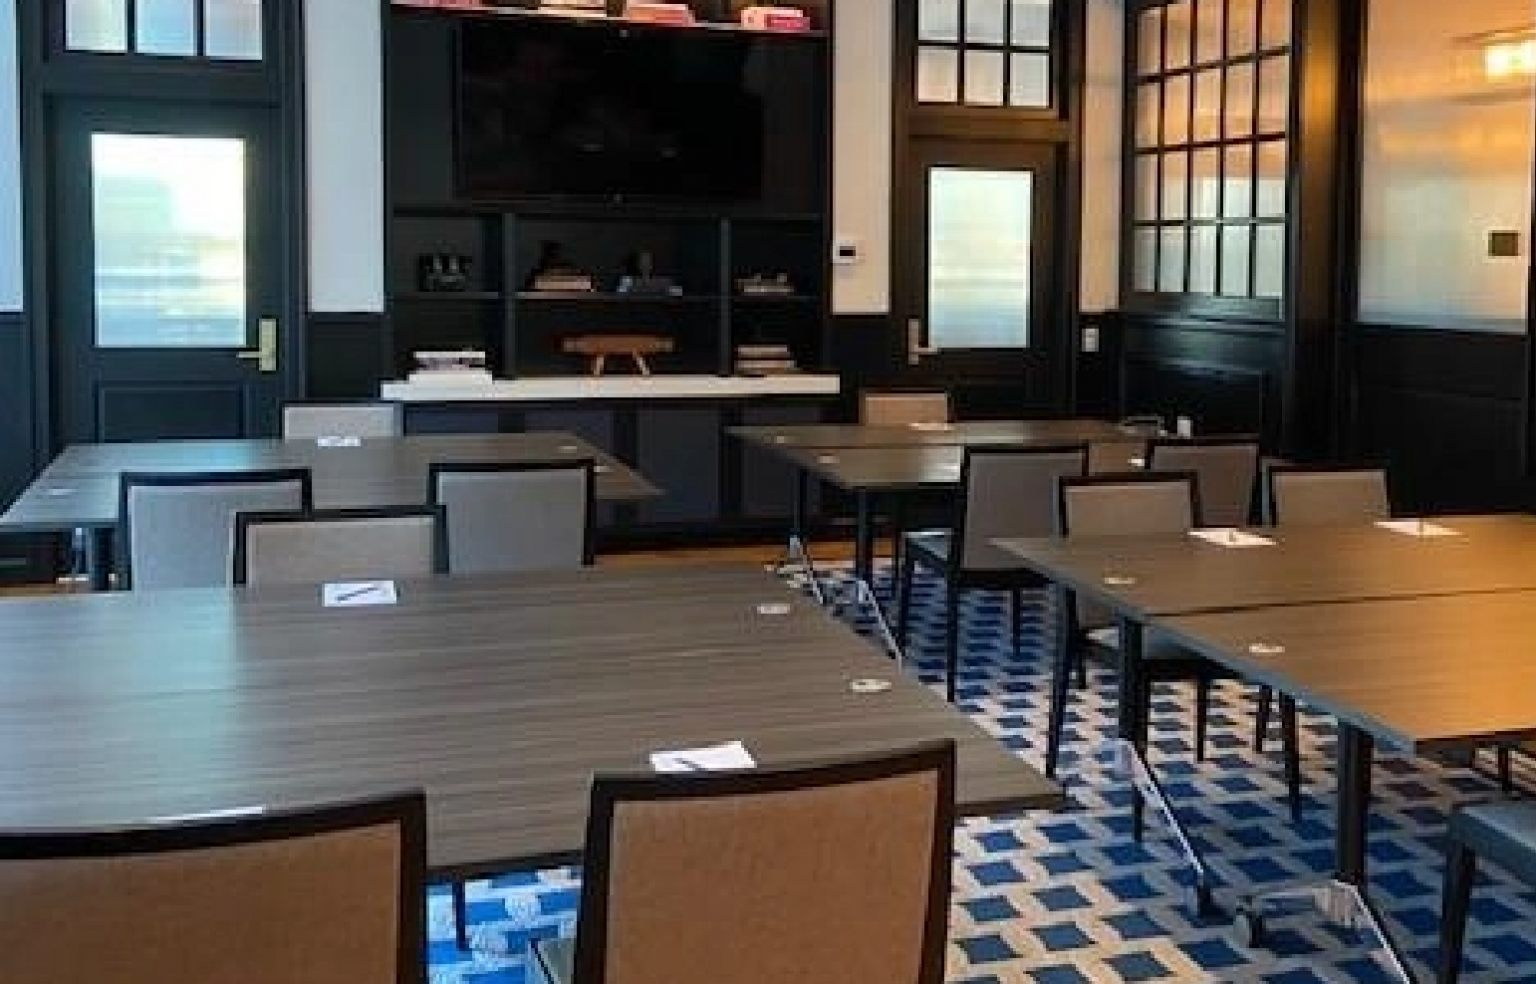 Modern conference room in a Newport, RI hotel with long tables, grey chairs, stylish blue carpet, and a bar area with shelves in the background.